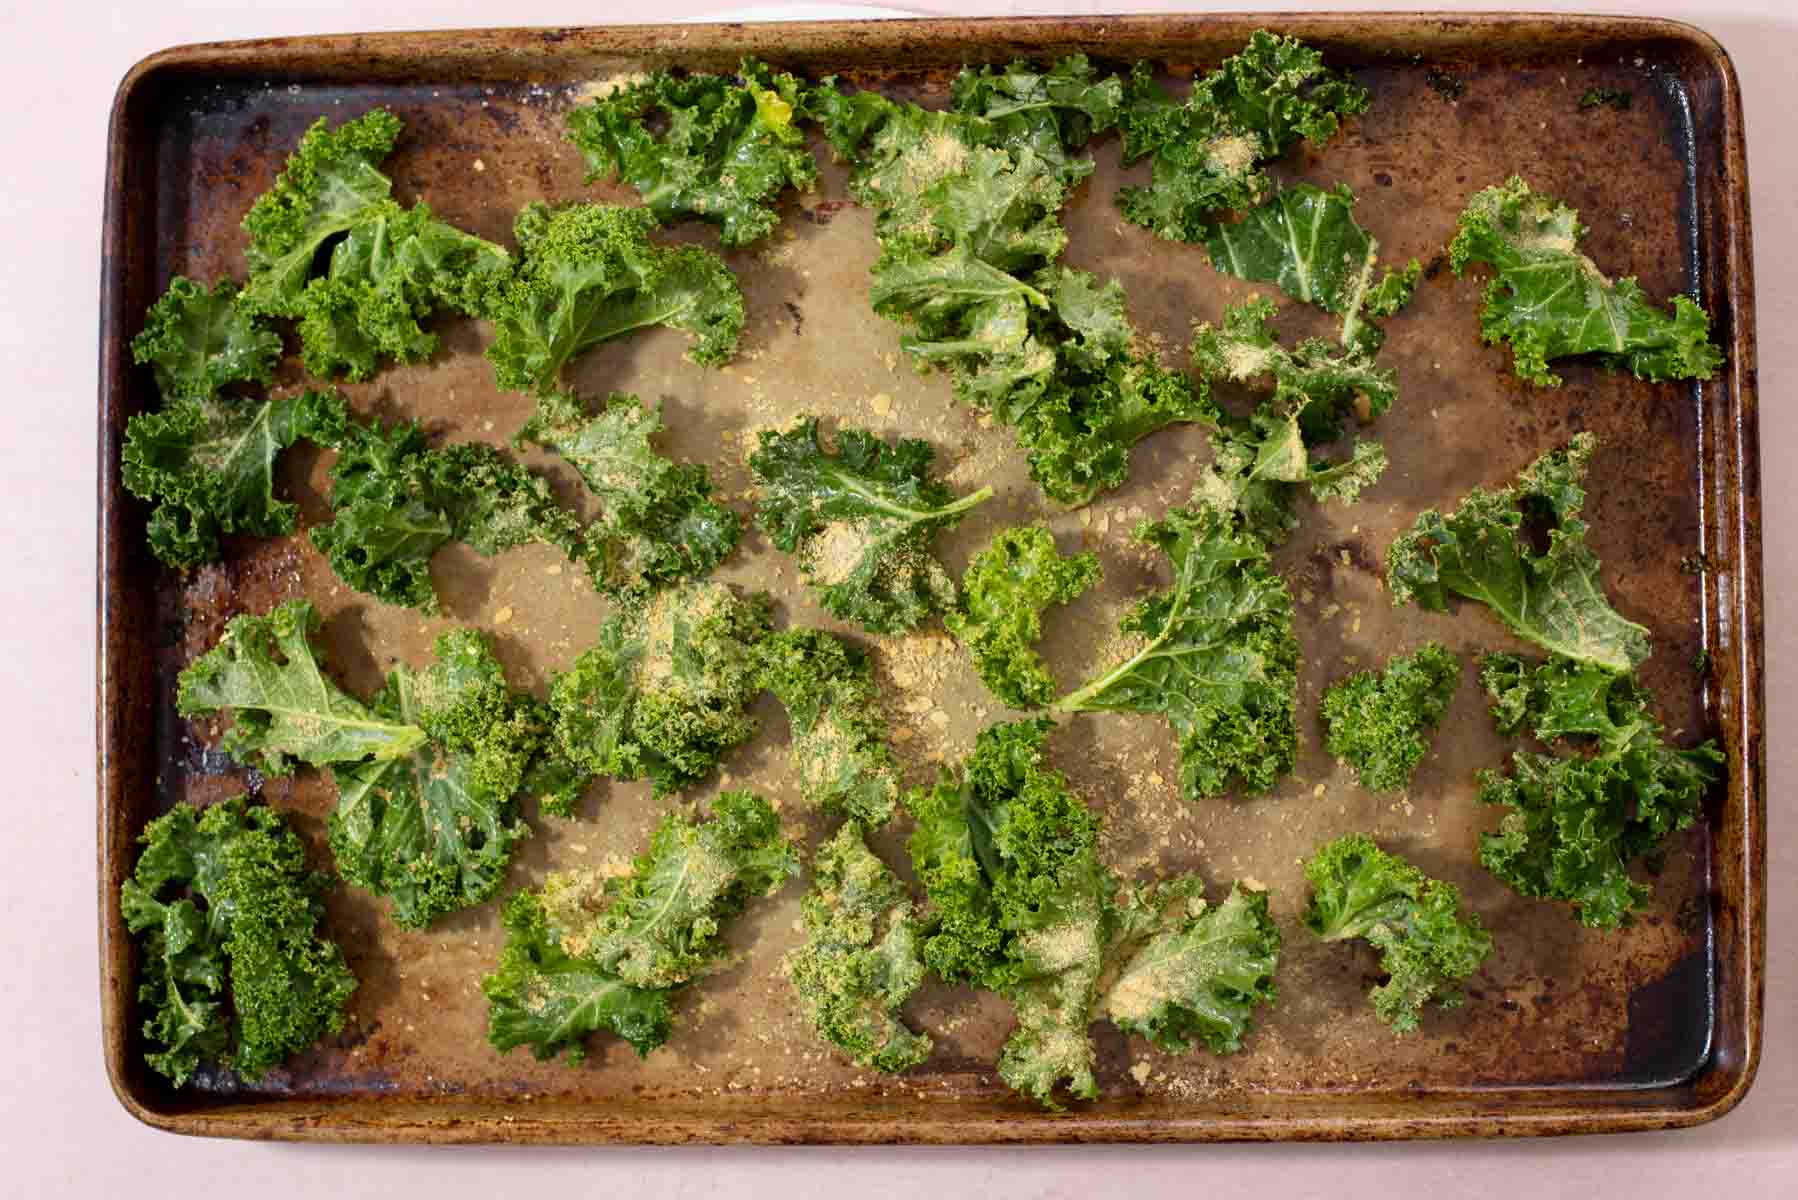 Kale pieces spread out on a baking sheet.